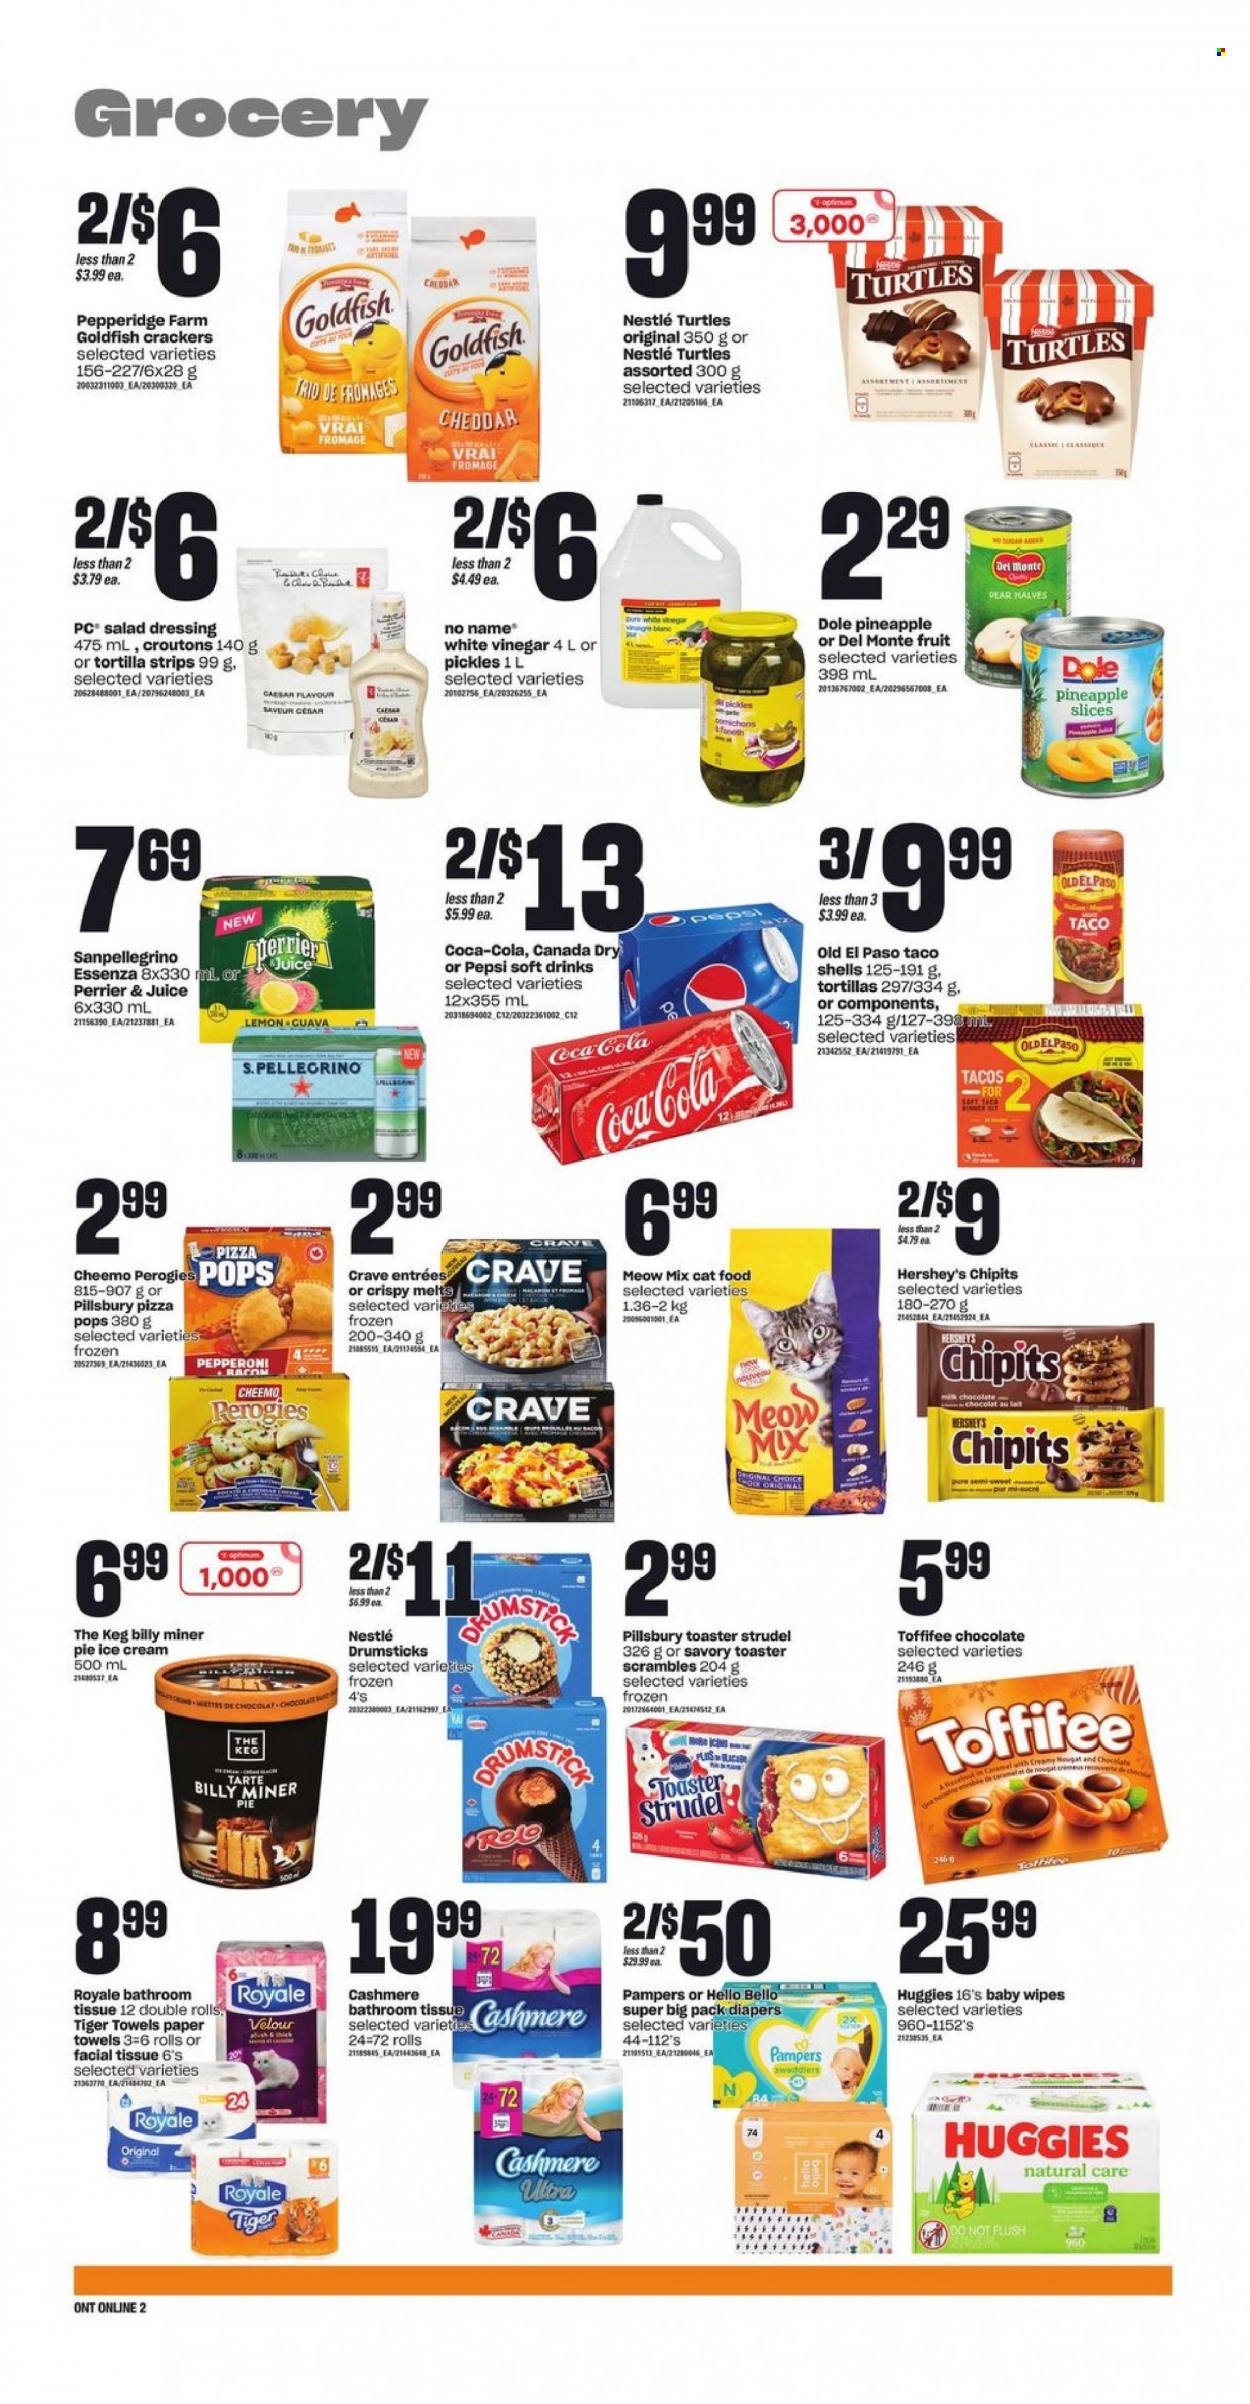 thumbnail - Independent Flyer - November 24, 2022 - November 30, 2022 - Sales products - tortillas, pie, strudel, Old El Paso, tacos, Dole, pears, No Name, pizza, Pillsbury, pepperoni, ice cream, Hershey's, milk chocolate, crackers, chocolate bar, Goldfish, croutons, pickles, Del Monte, caramel, salad dressing, dressing, salsa, vinegar, Canada Dry, Coca-Cola, Pepsi, juice, soft drink, Perrier, San Pellegrino, wine, rosé wine, wipes, baby wipes, nappies, bath tissue, kitchen towels, paper towels, animal food, turtles, cat food, Optimum, Meow Mix, Nestlé, Huggies, Pampers, nougat. Page 6.